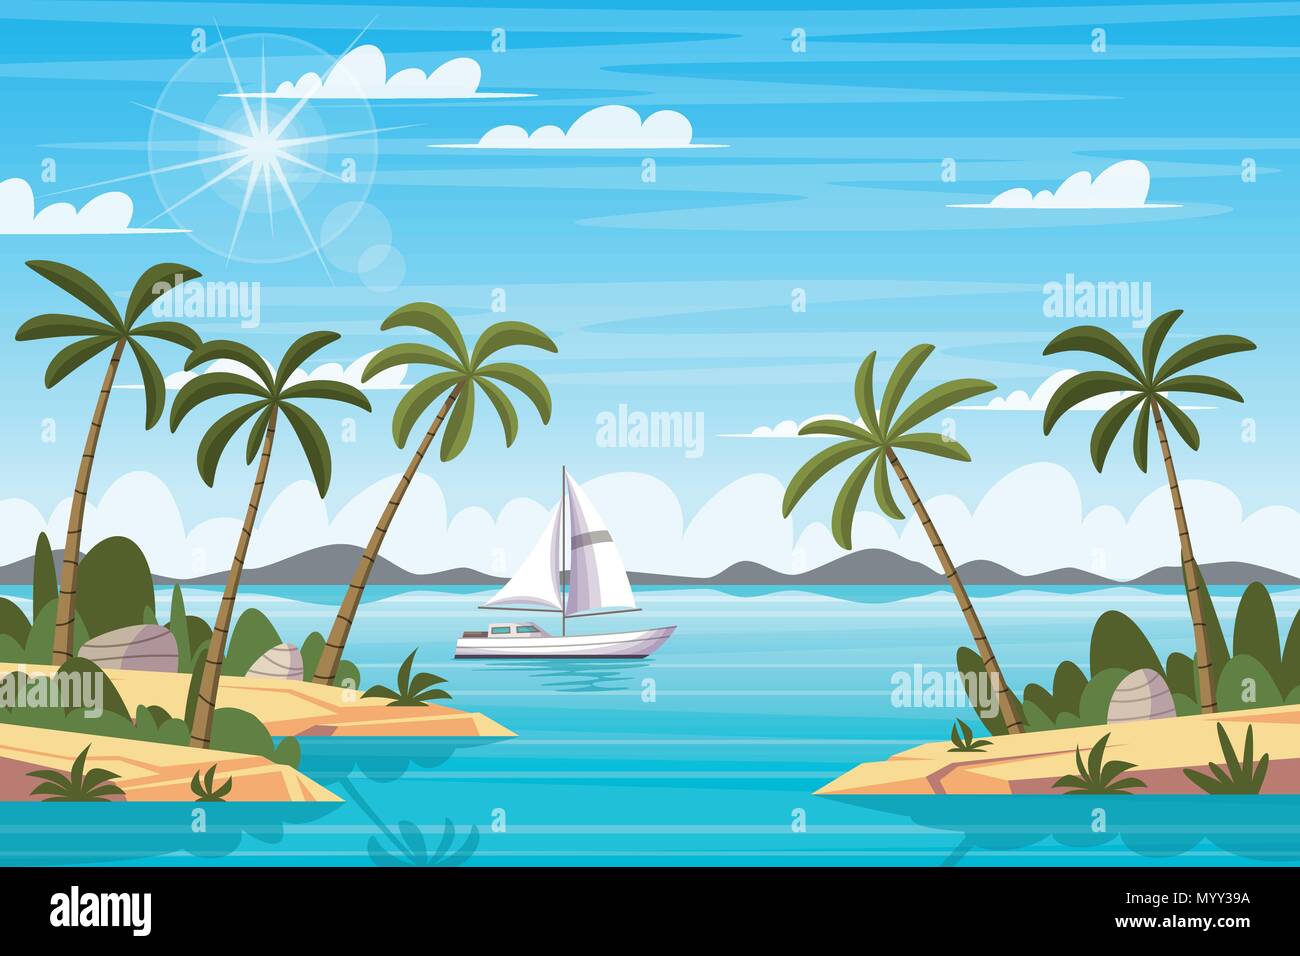 Tropical landscape with boat and palm trees Stock Vector